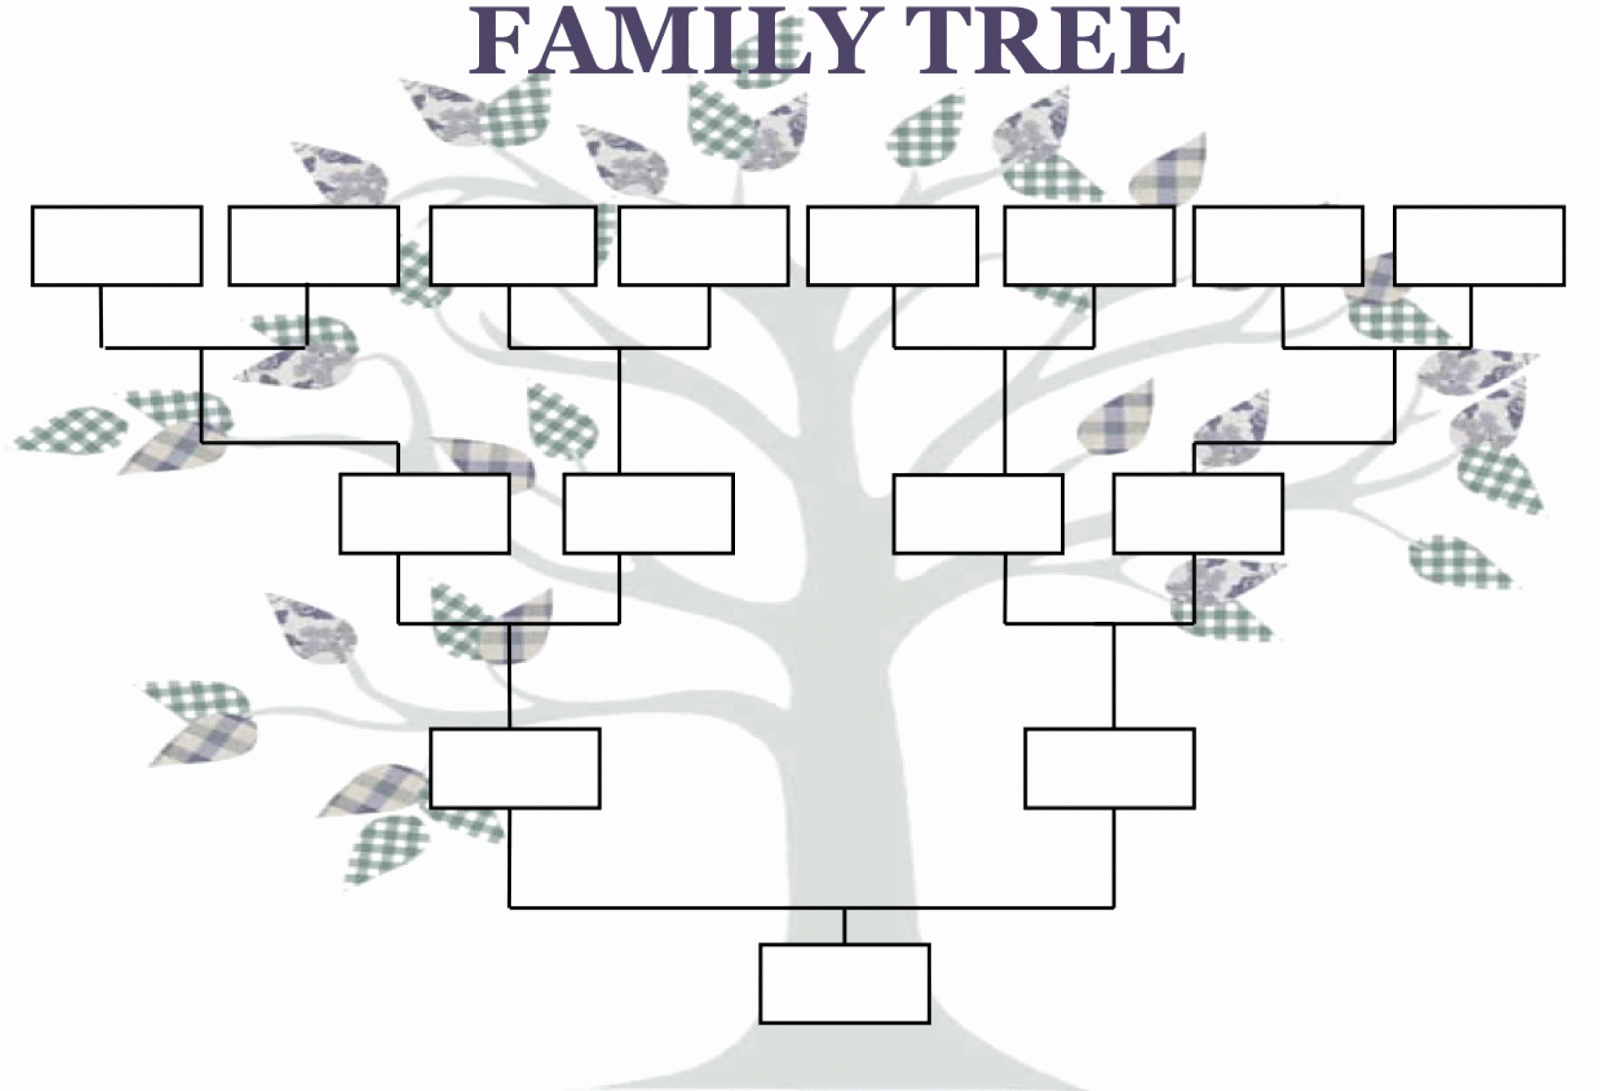 5 Generation Family Tree Template Inspirational Family Tree Template